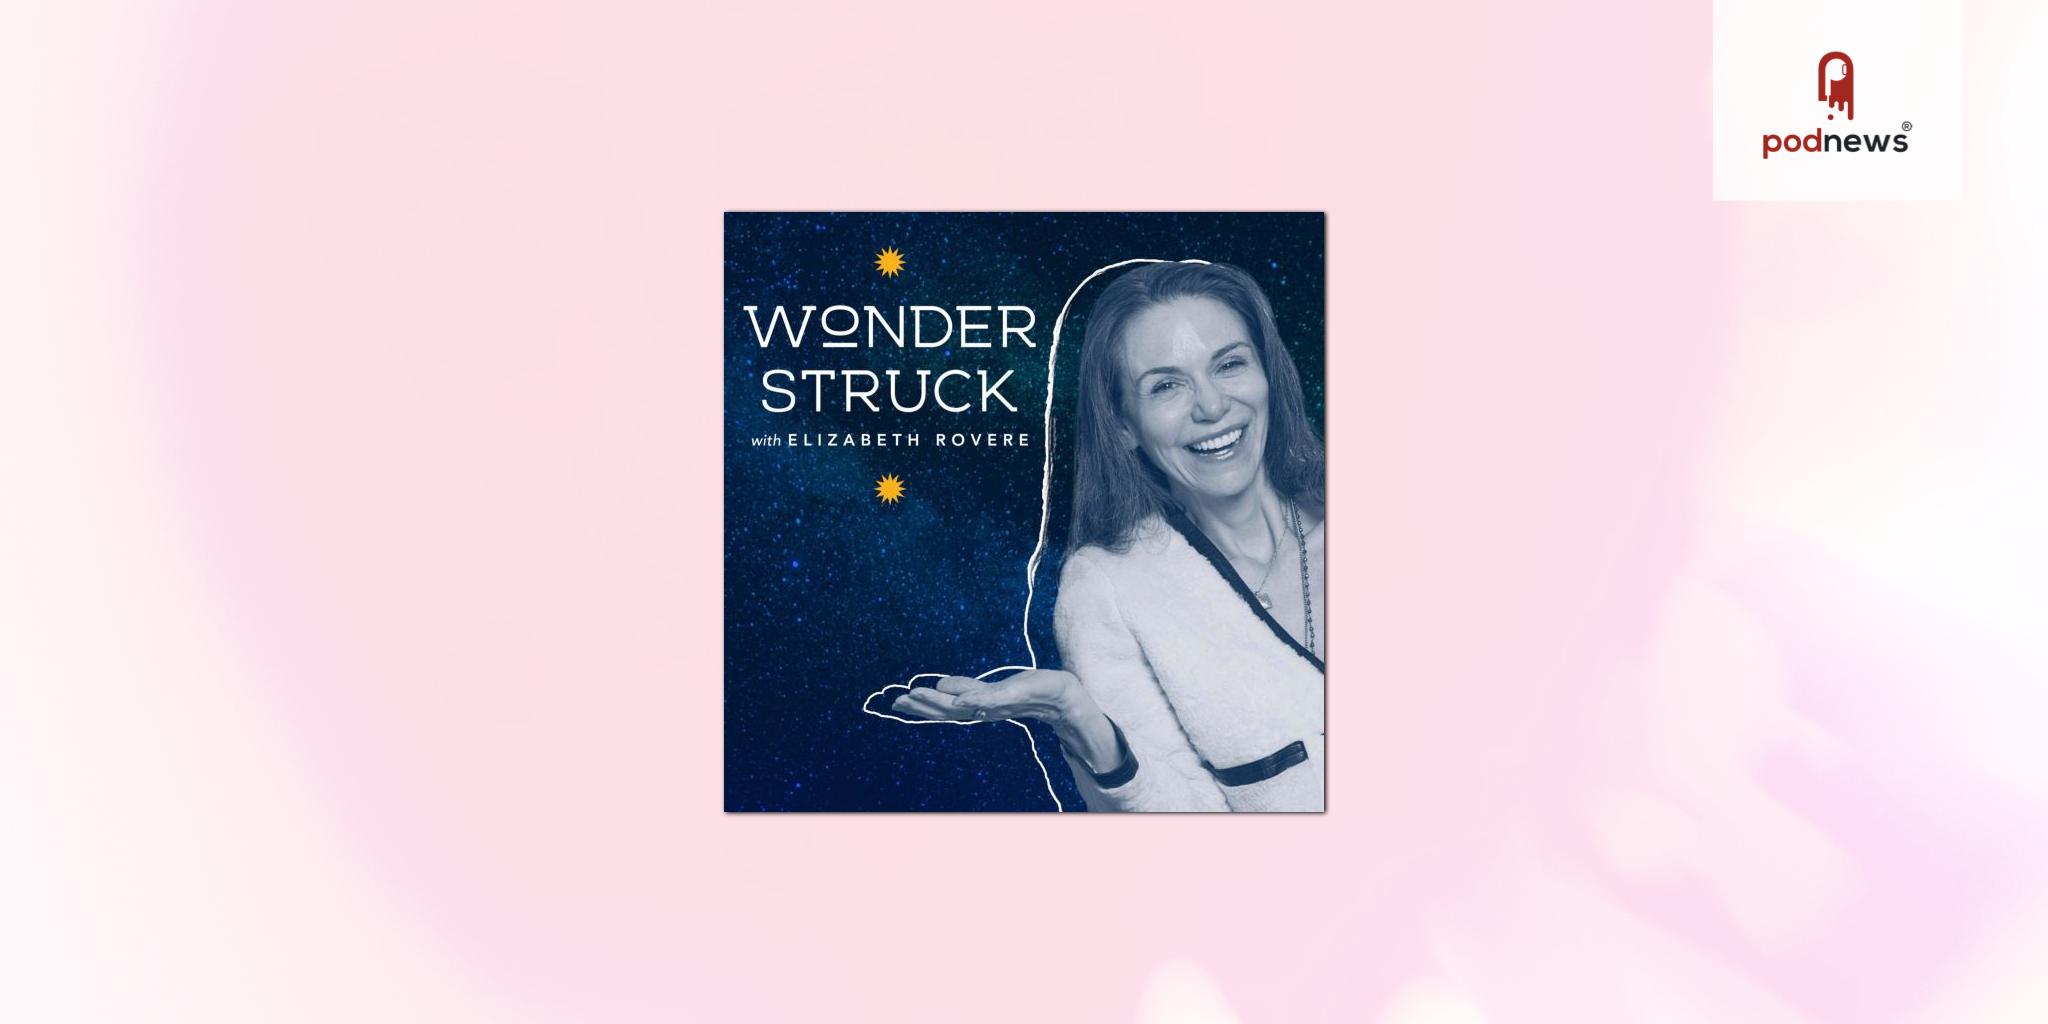 New - The Wonderstruck Podcast, taking listeners on a journey to moments that can transform lives